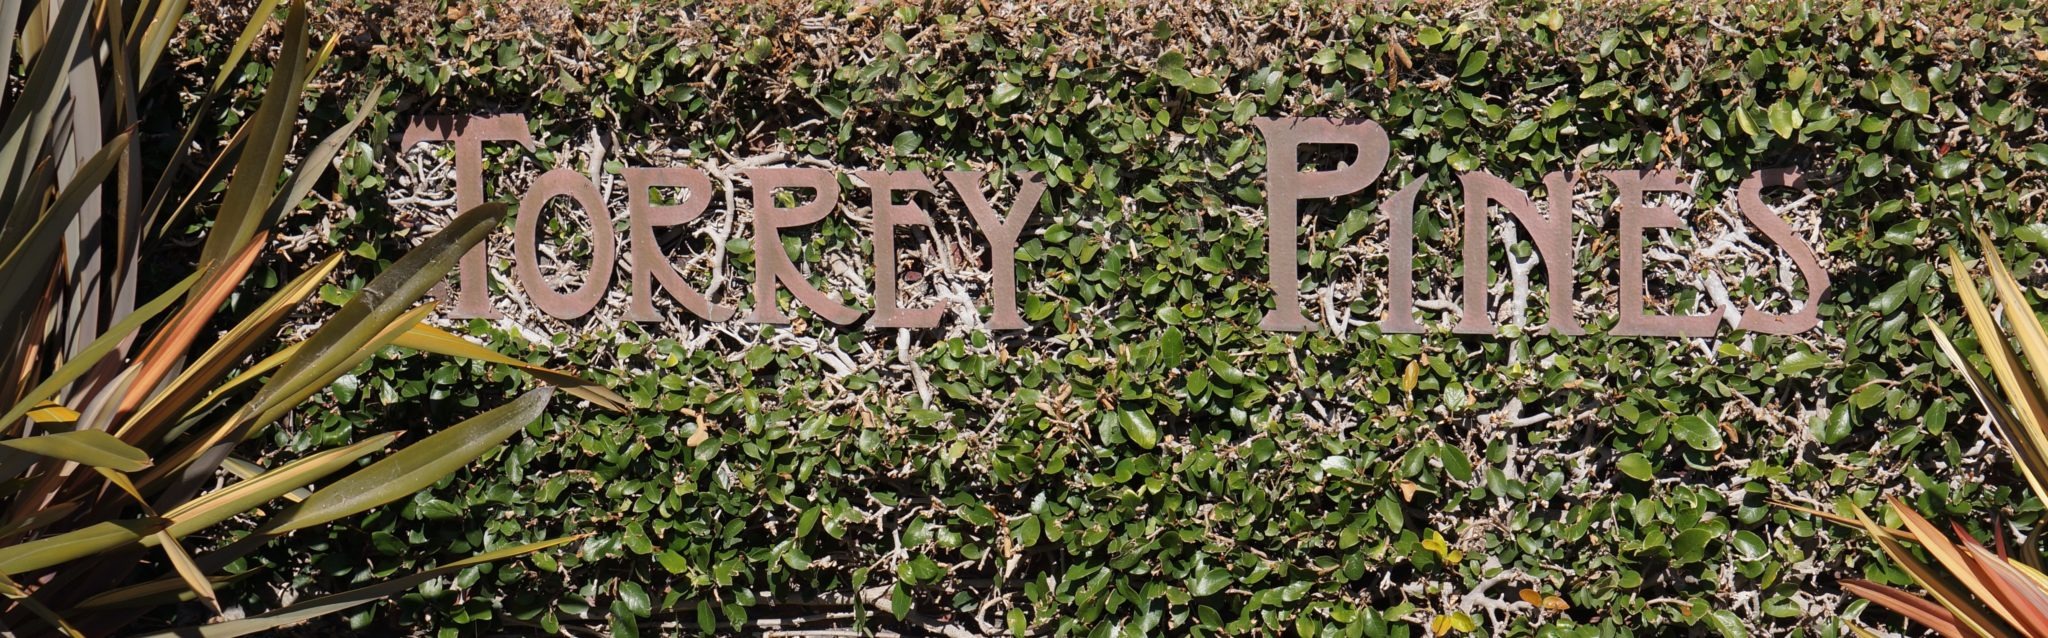 Sign of Torrey Pines Golf Course